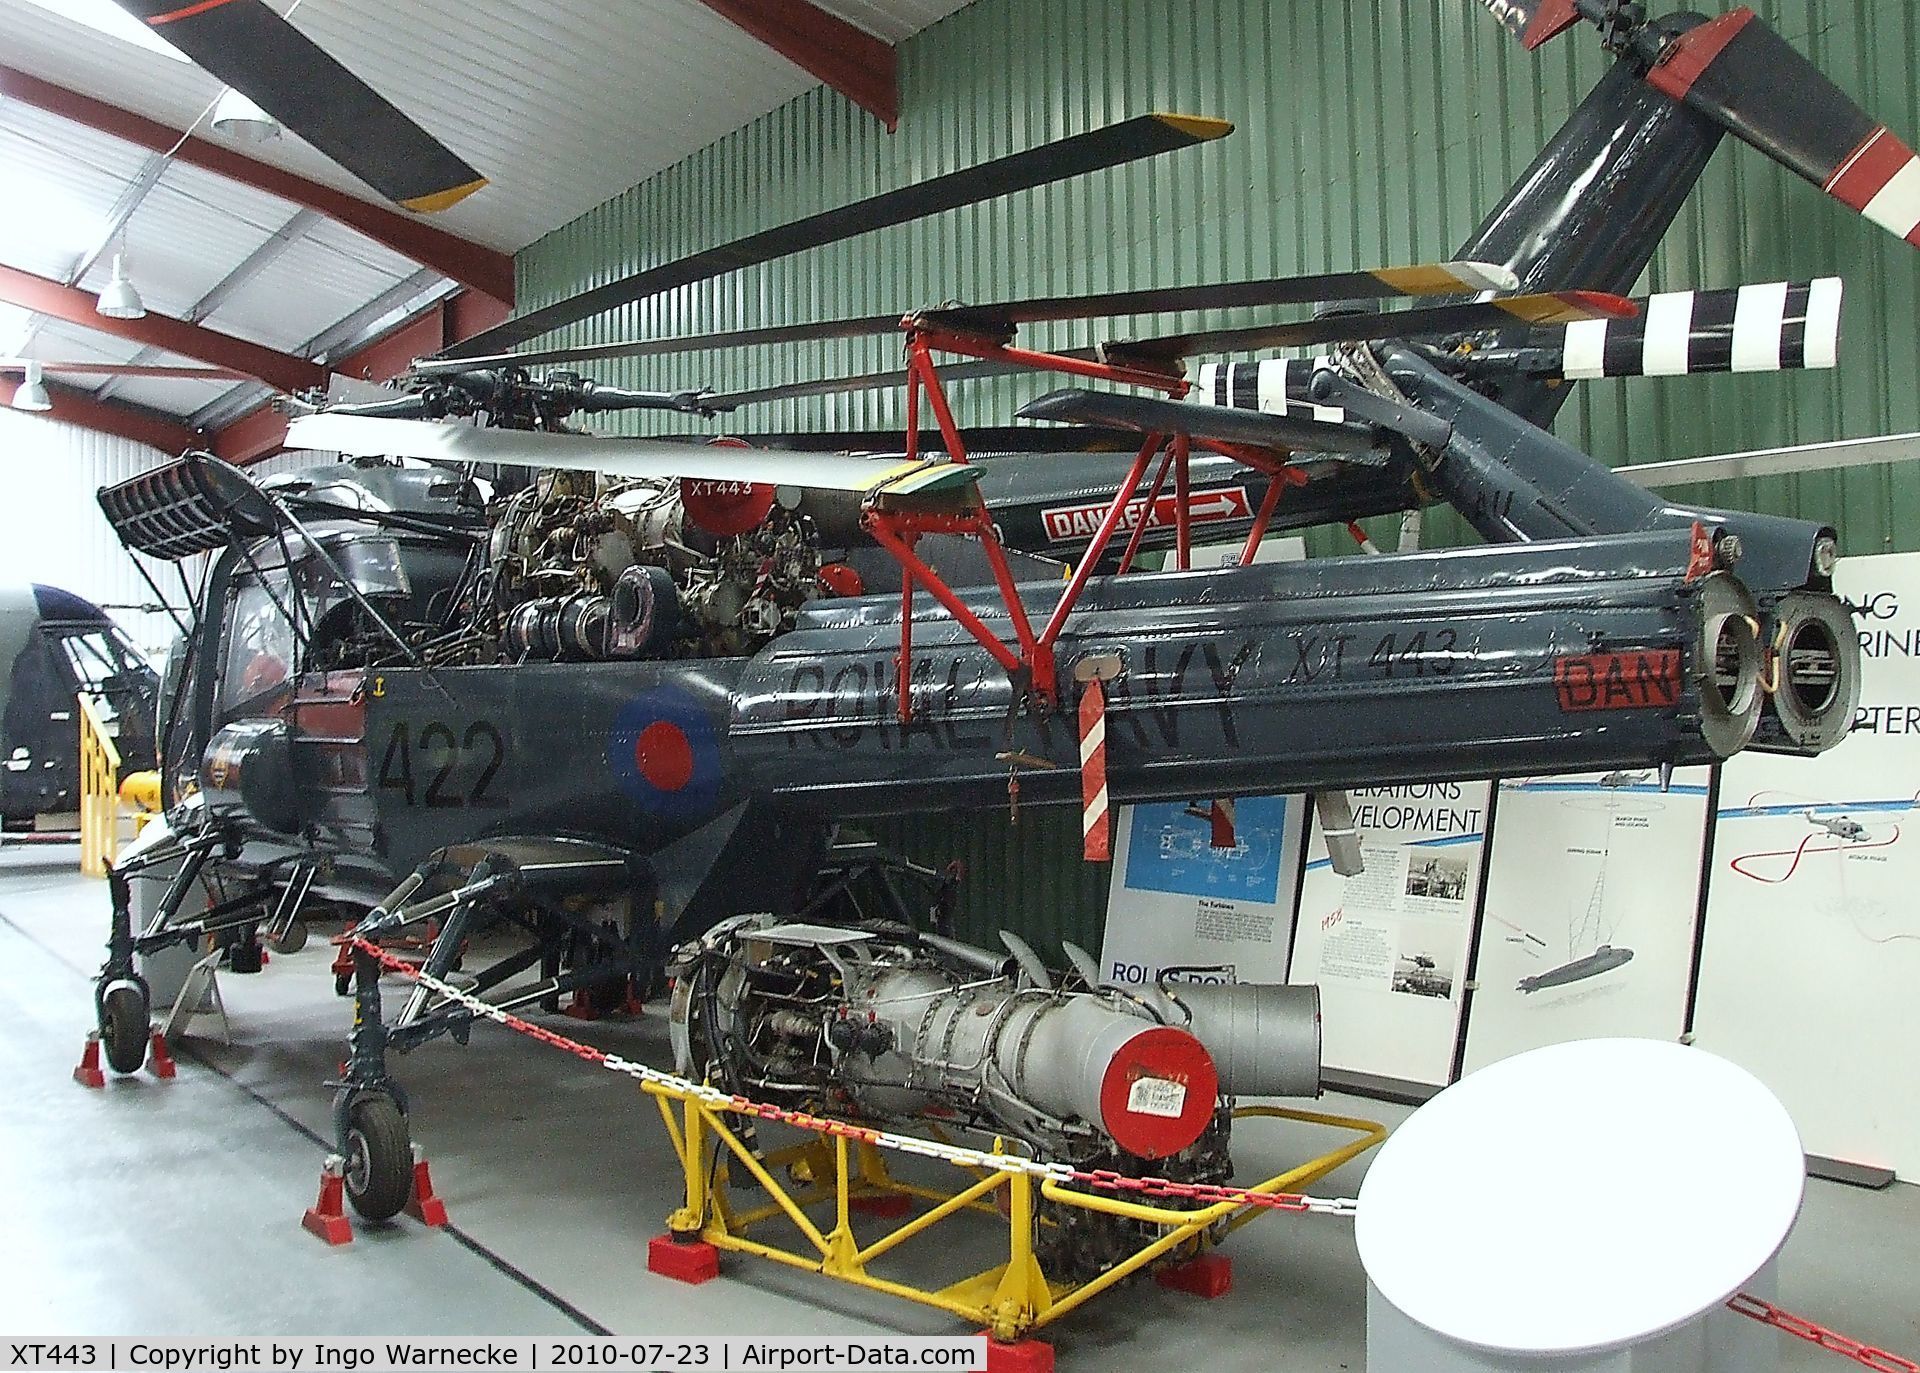 XT443, 1966 Westland Wasp HAS.1 C/N F9613, Westland Wasp HAS1 at the Helicopter Museum, Weston-super-Mare